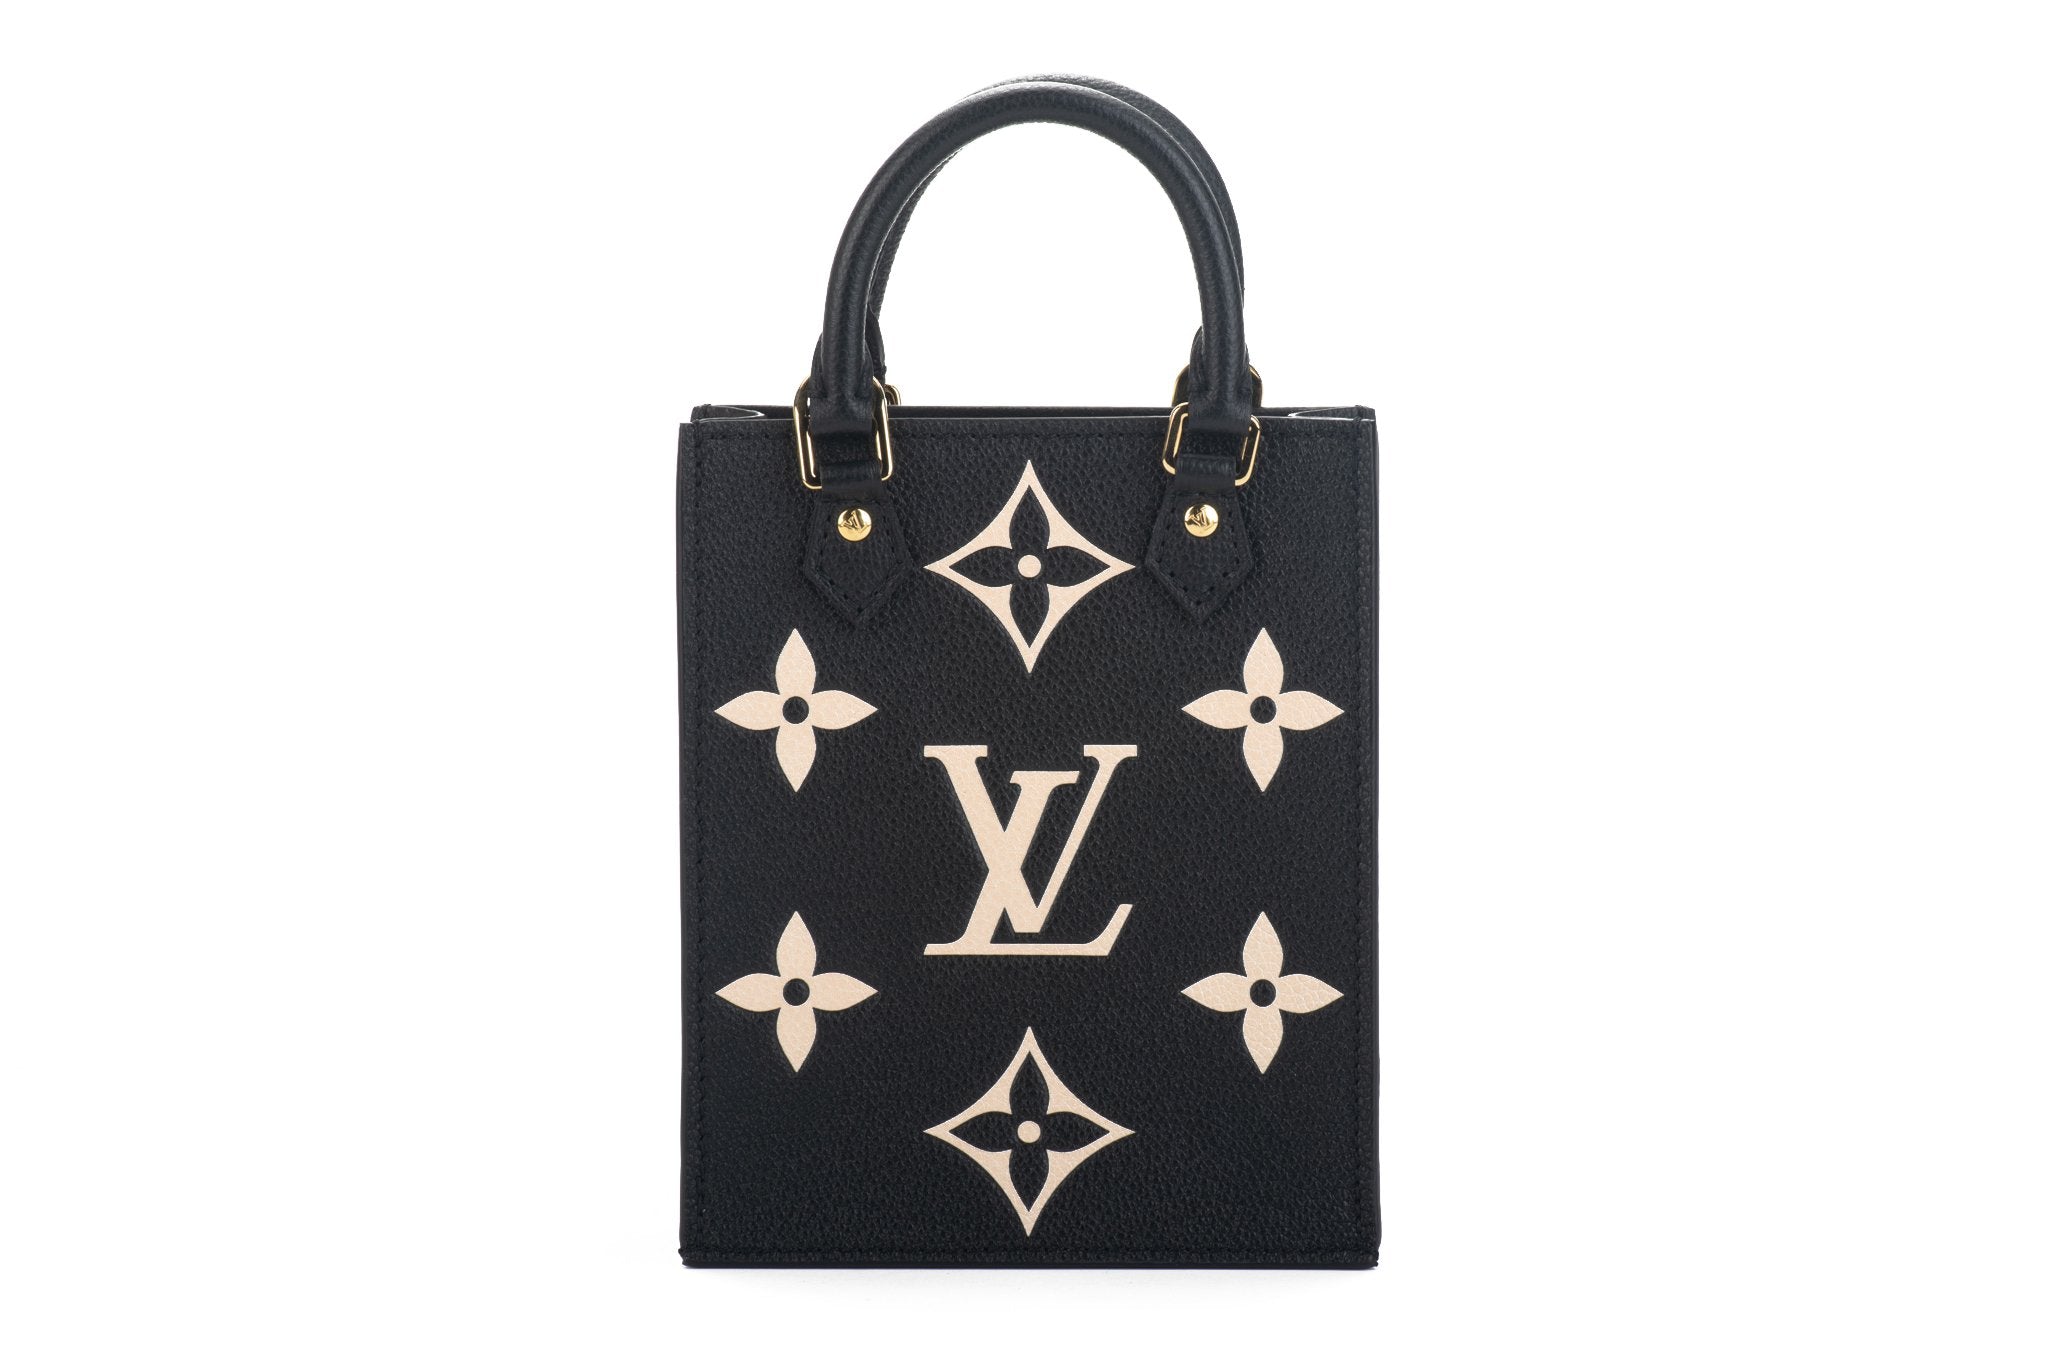 Louis Vuitton Sac Plat Small Model Shoulder Bag in Black, White and